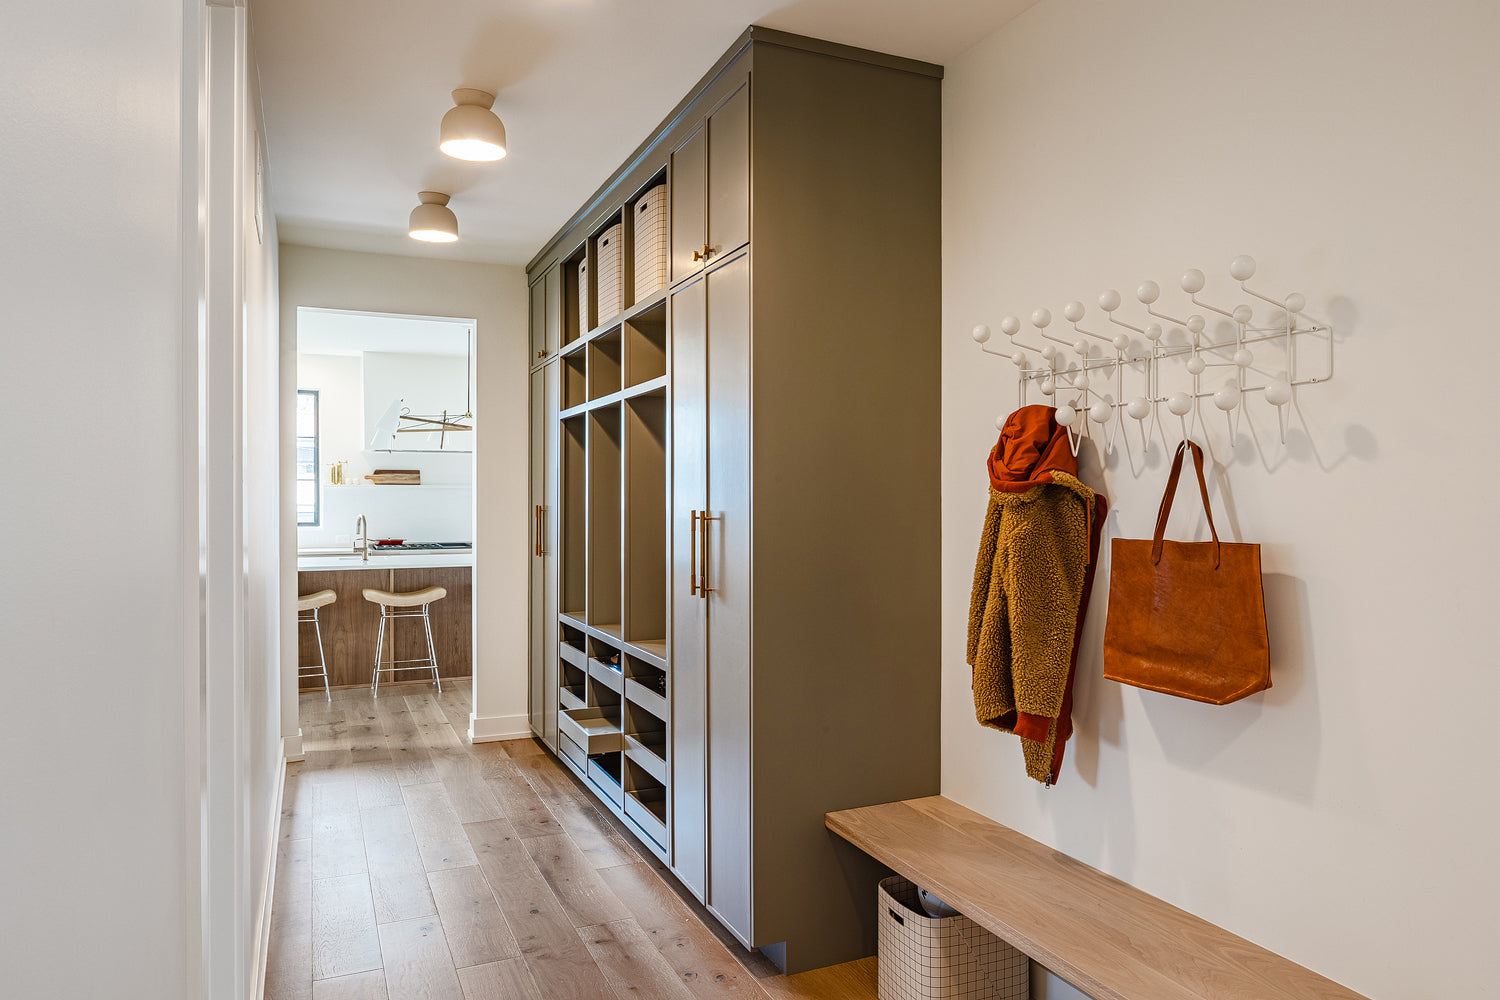 Mudroom cabinetry and storage by Edgework Creative